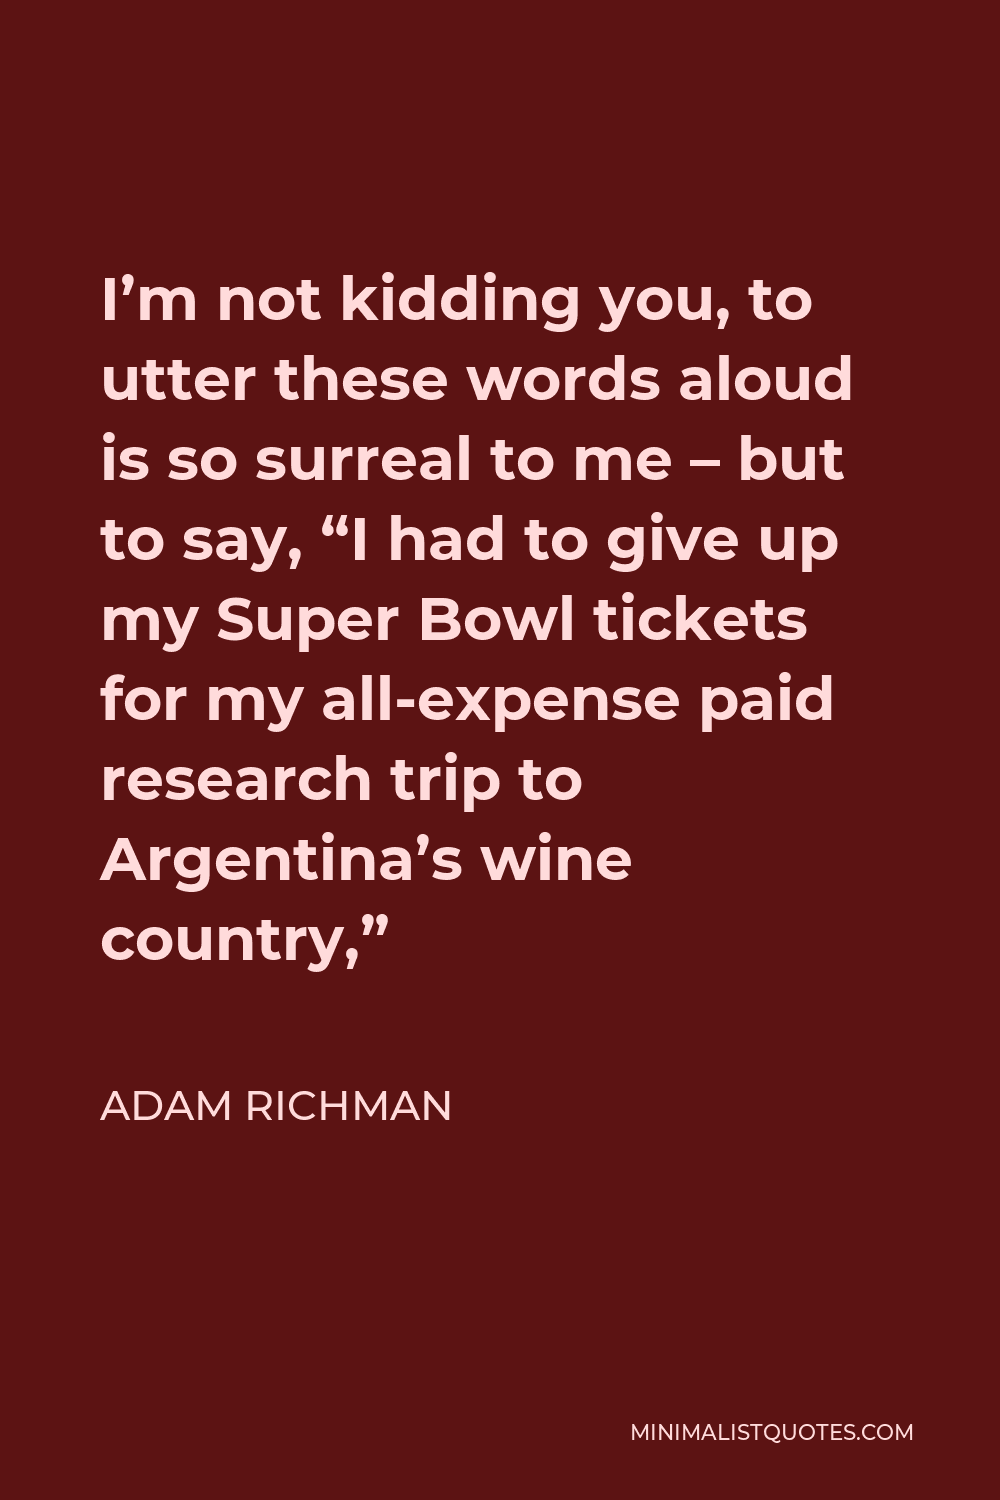 Adam Richman Quote - I’m not kidding you, to utter these words aloud is so surreal to me – but to say, “I had to give up my Super Bowl tickets for my all-expense paid research trip to Argentina’s wine country,”